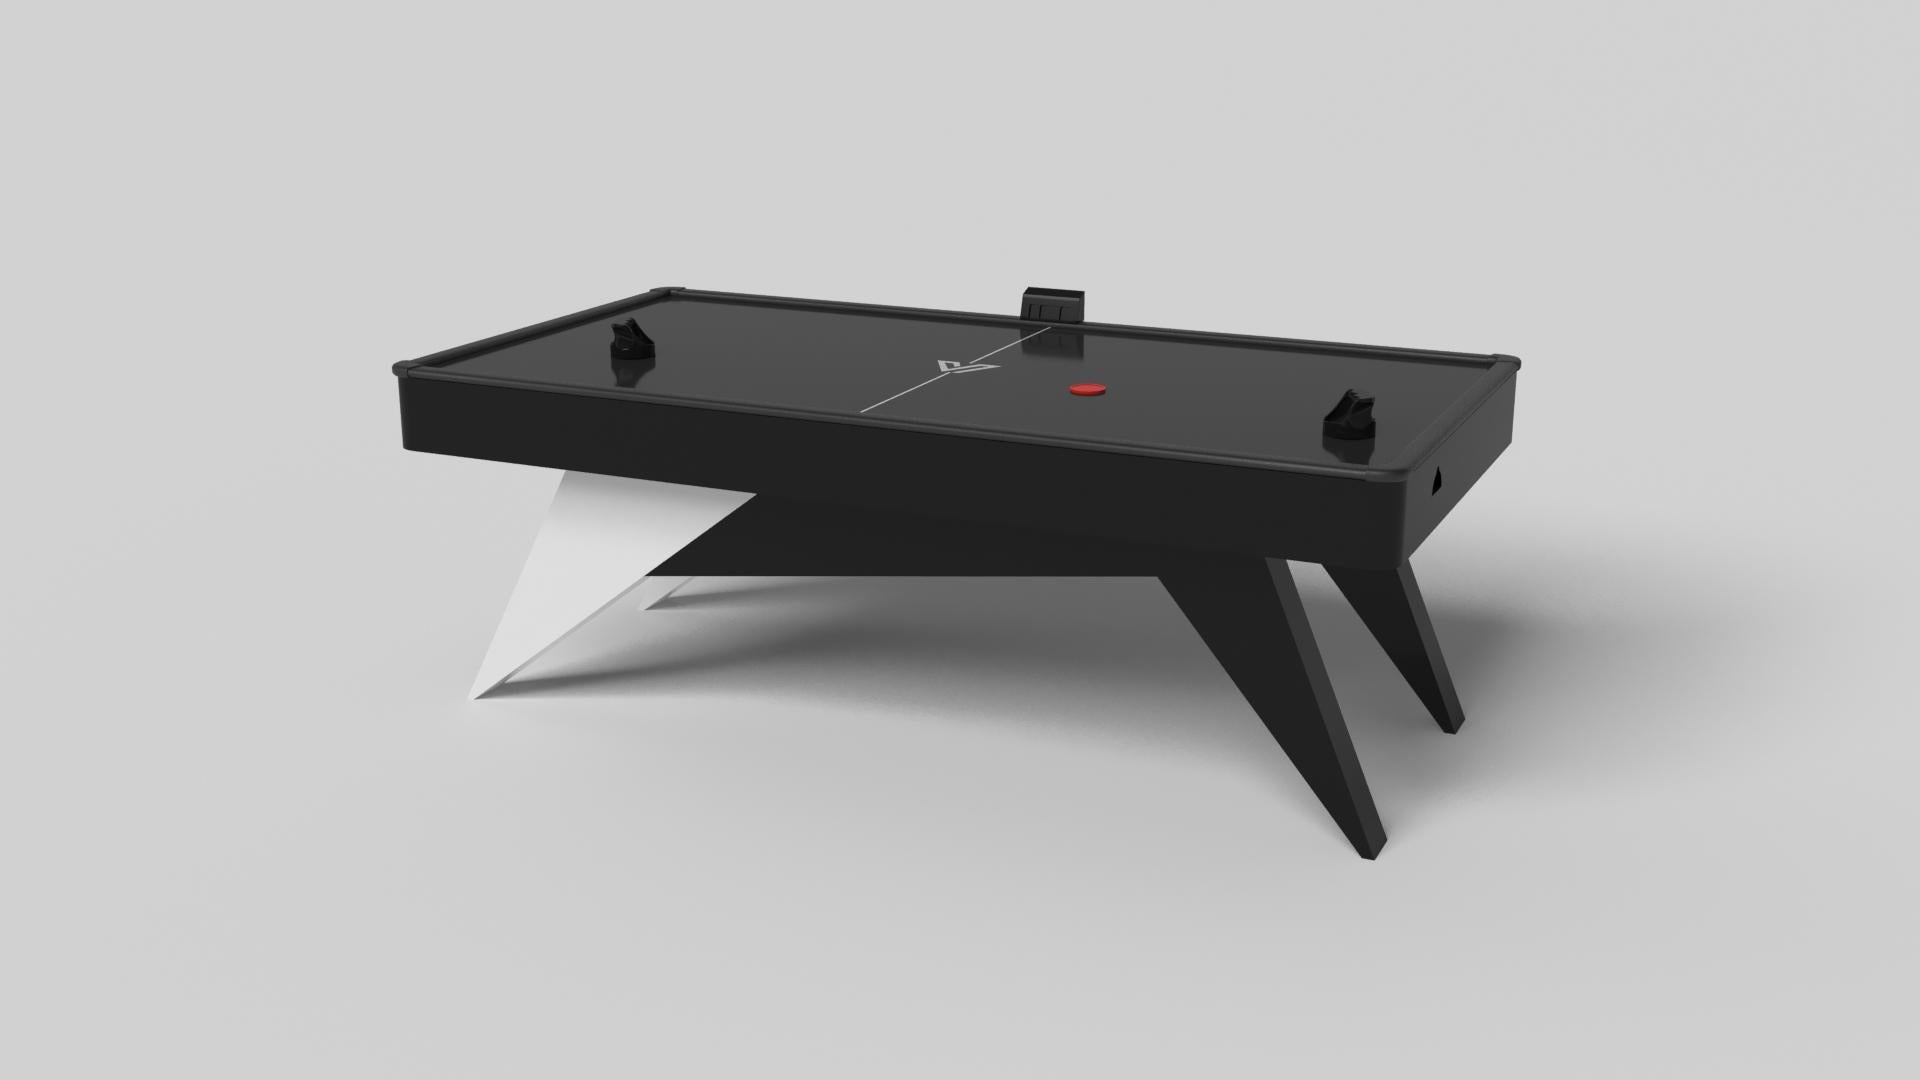 Simple yet sophisticated, the Mantis air hockey table puts a fresh, modern spin on a classic four-legged design. Sharp angles and tapered legs provide sleek stability.

Size:

88”X45”X31”